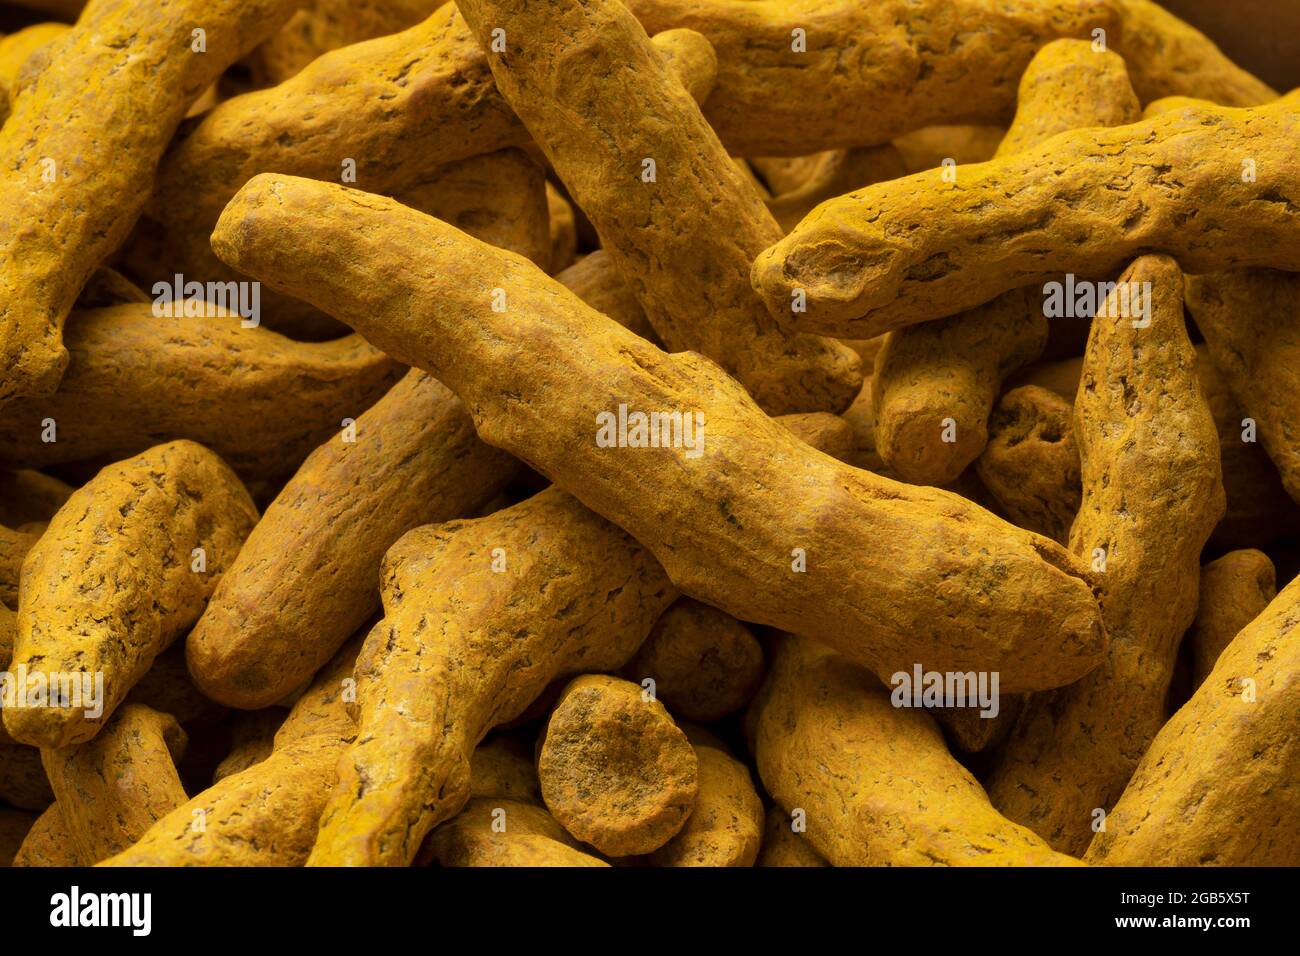 Dried yellowturmeric close up full frame as a background Stock Photo